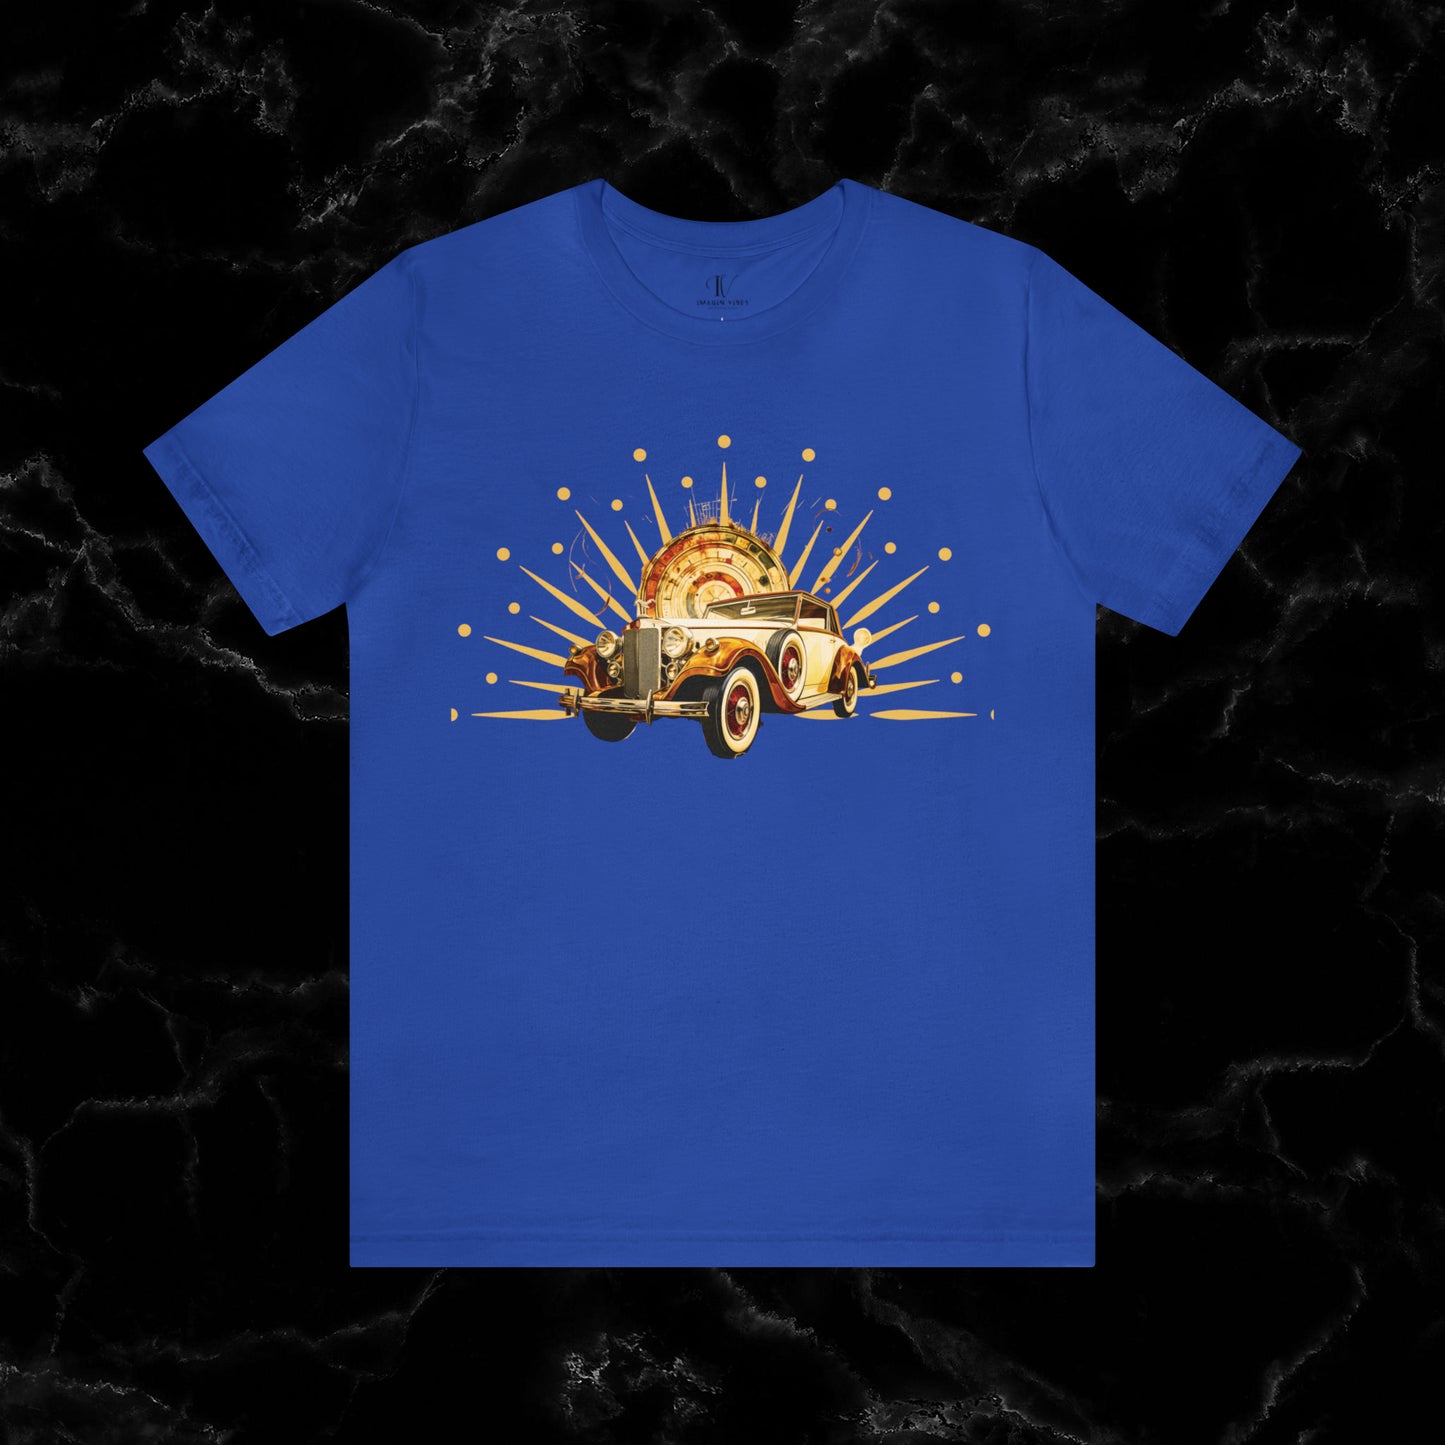 Vintage Car Enthusiast T-Shirt with Classic Wheels and Timeless Appeal Nostalgic T-Shirt True Royal S 